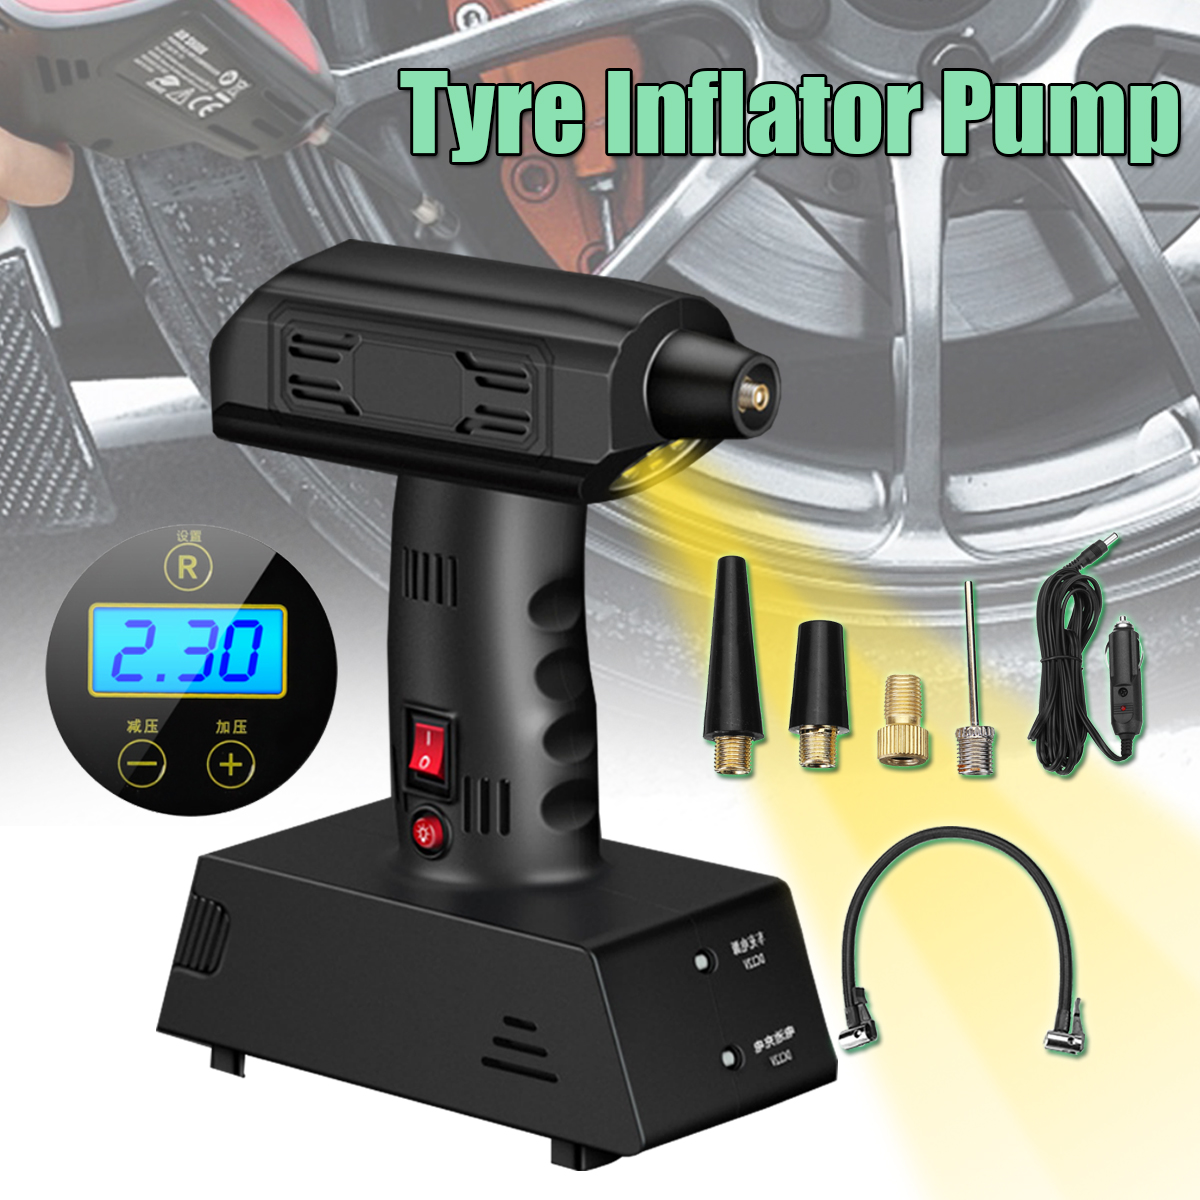 Portable-12V-Cordless-Electric-LCD-Air-Compressor-Pump-Ball-Car-Tyre-Inflator-1307211-1